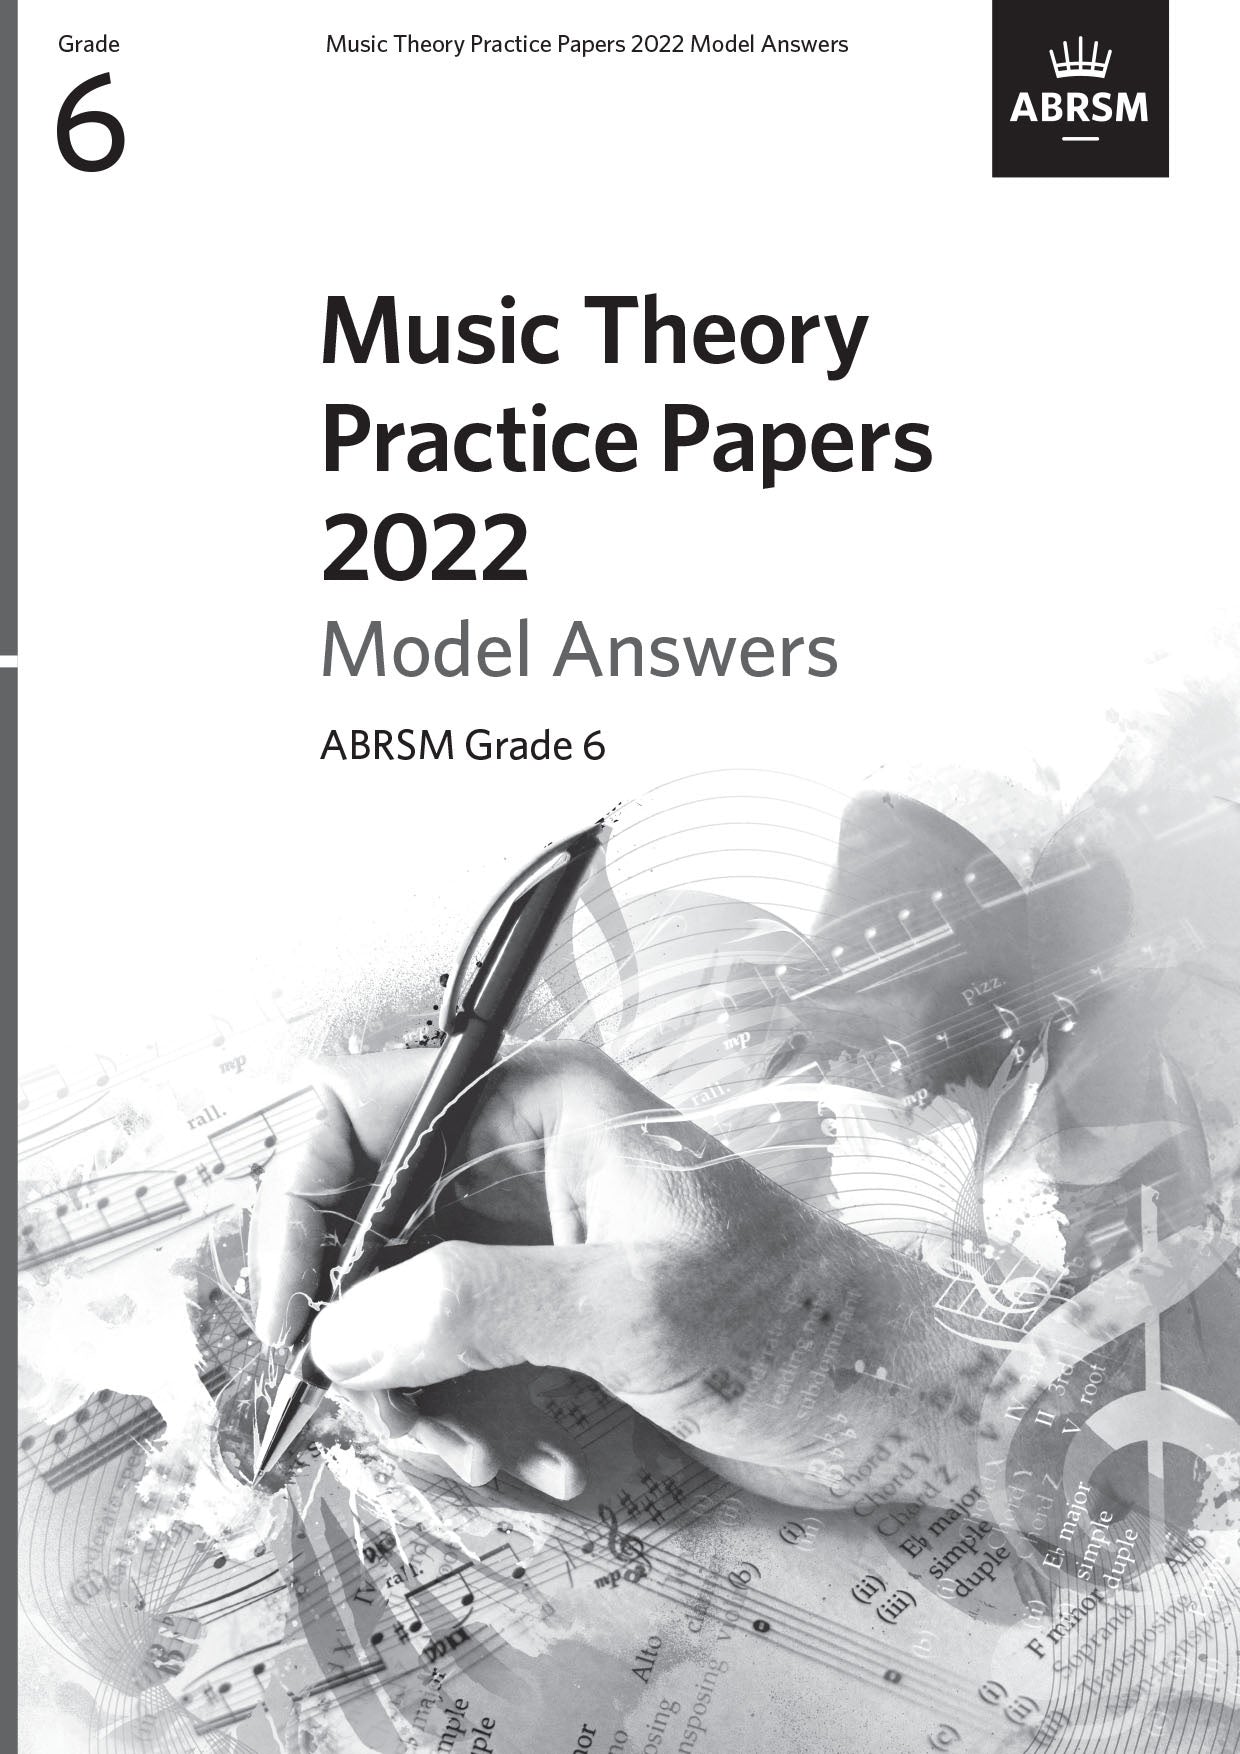 ABRSM Music Theory Practice Papers Model Answers 2022 Grade 6